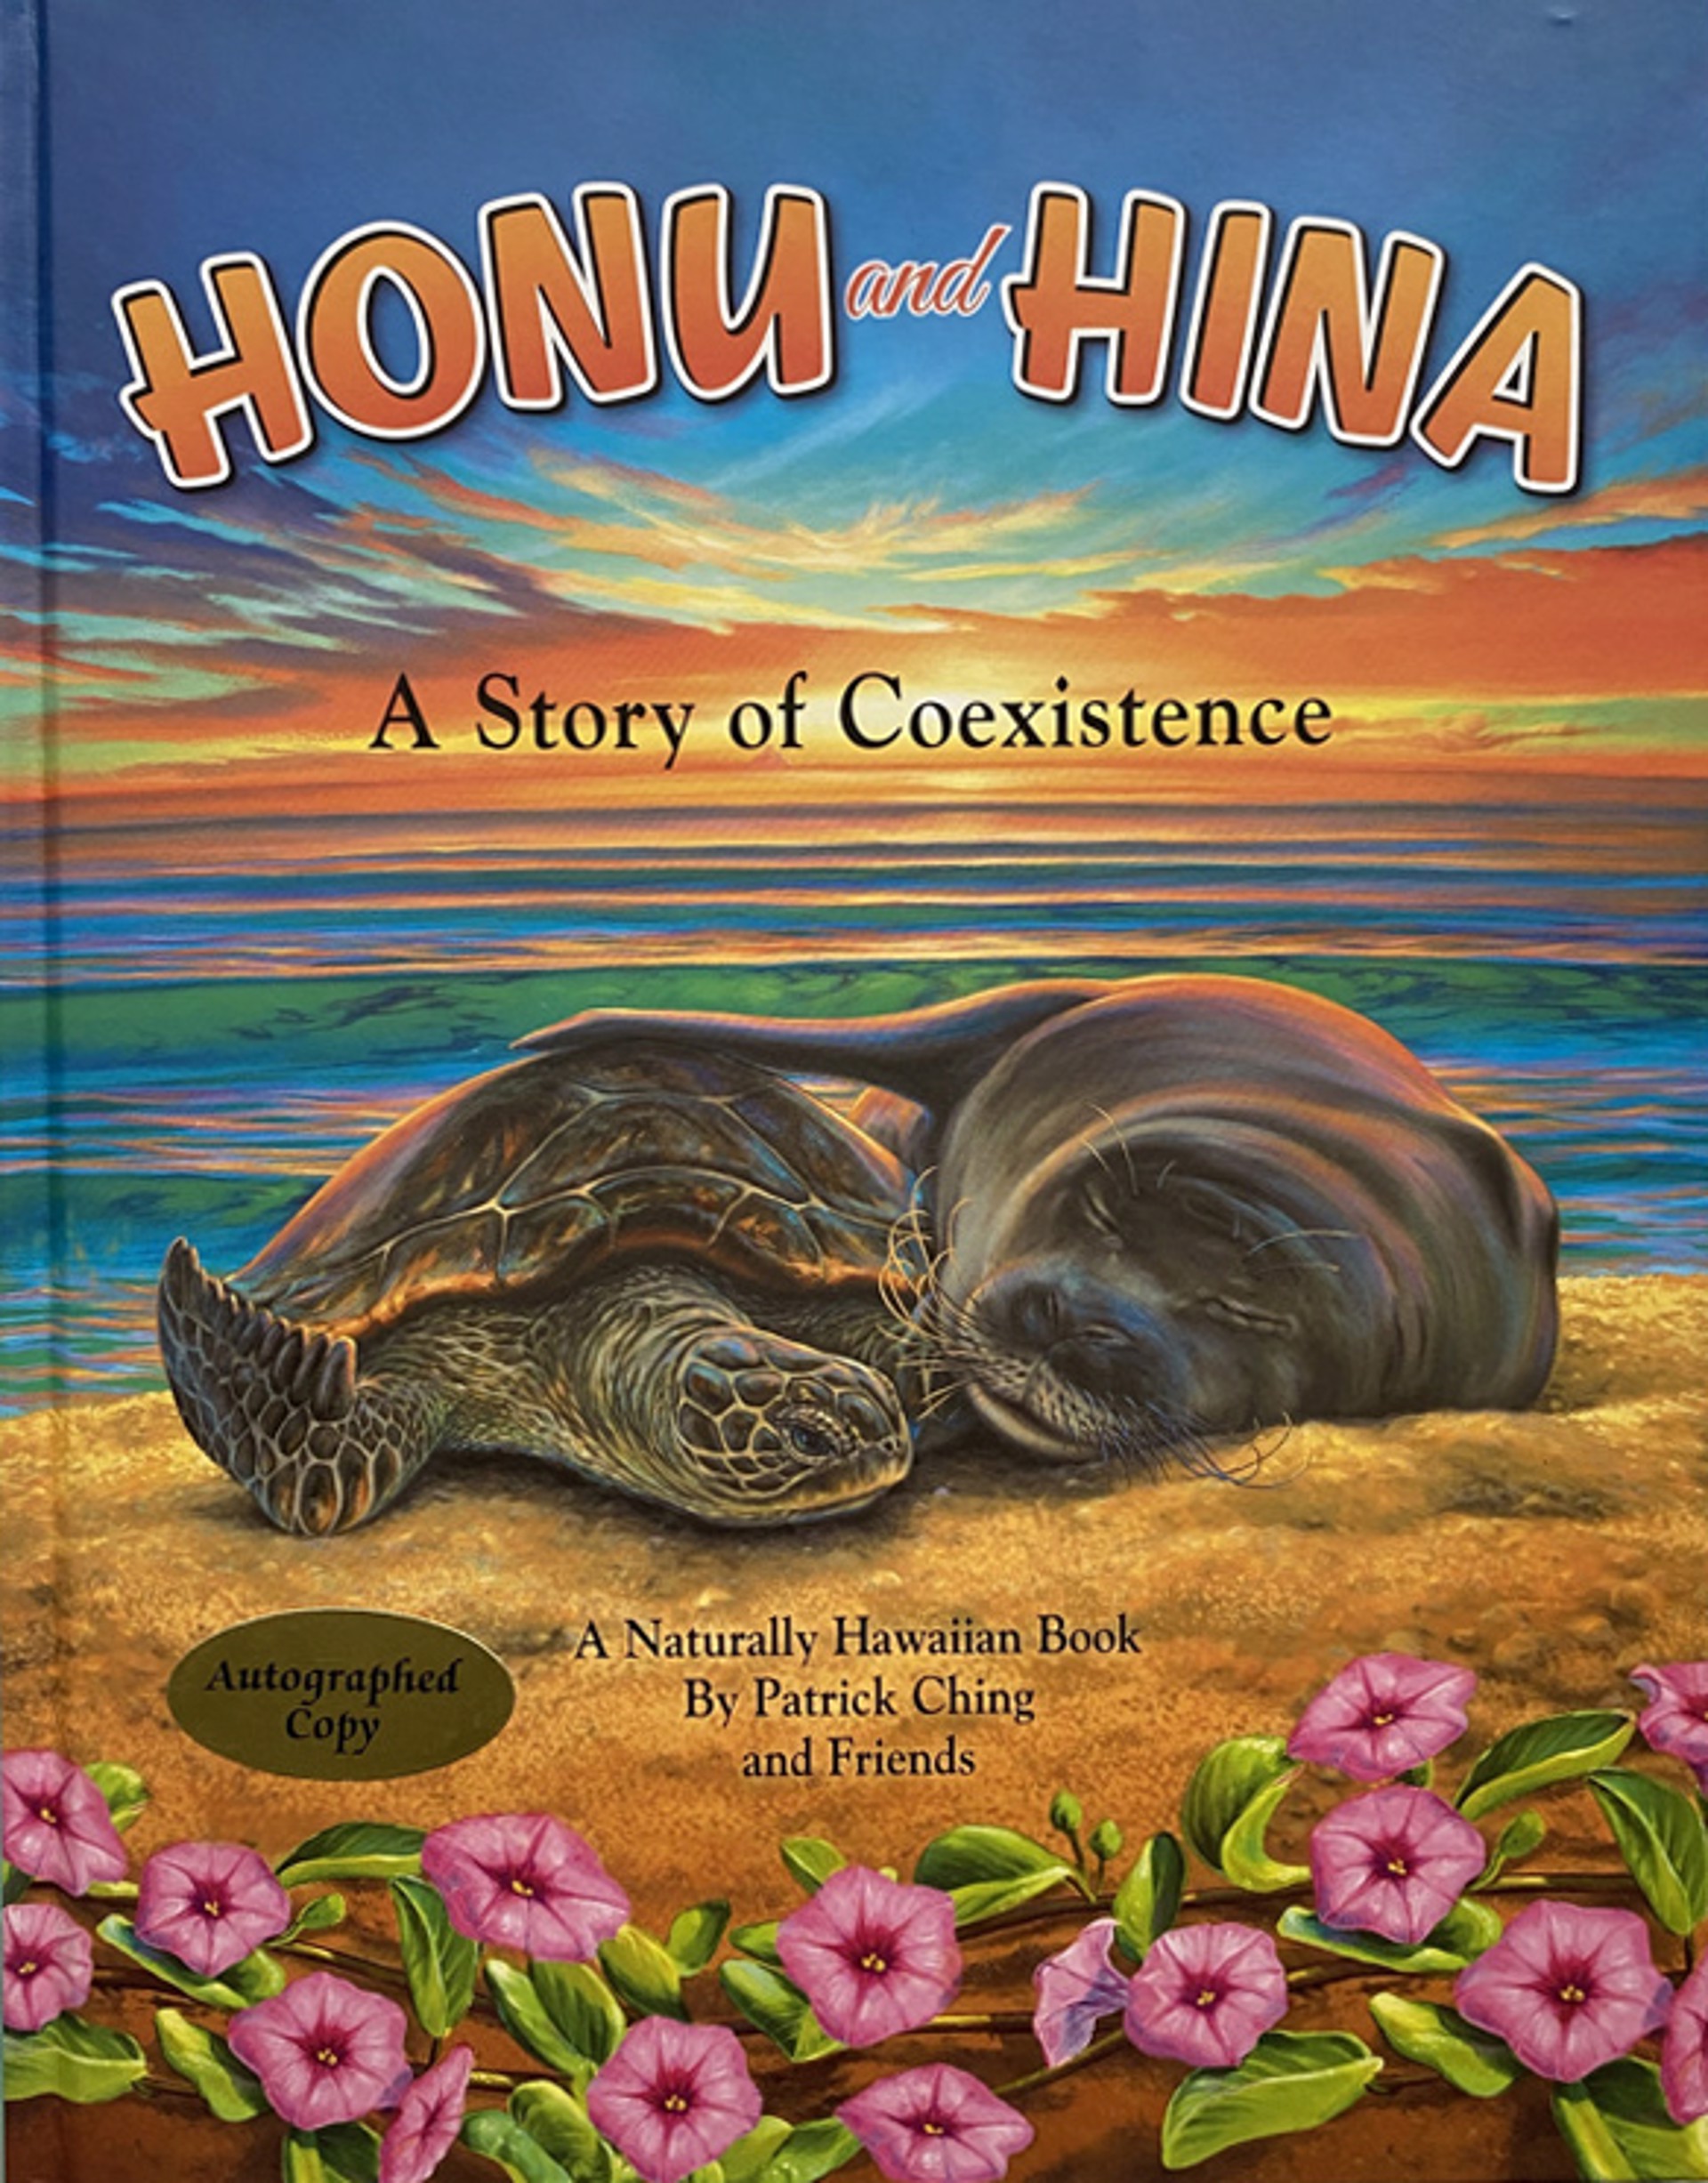 Honu and Hina - A Story of Coexistence by Patrick Ching